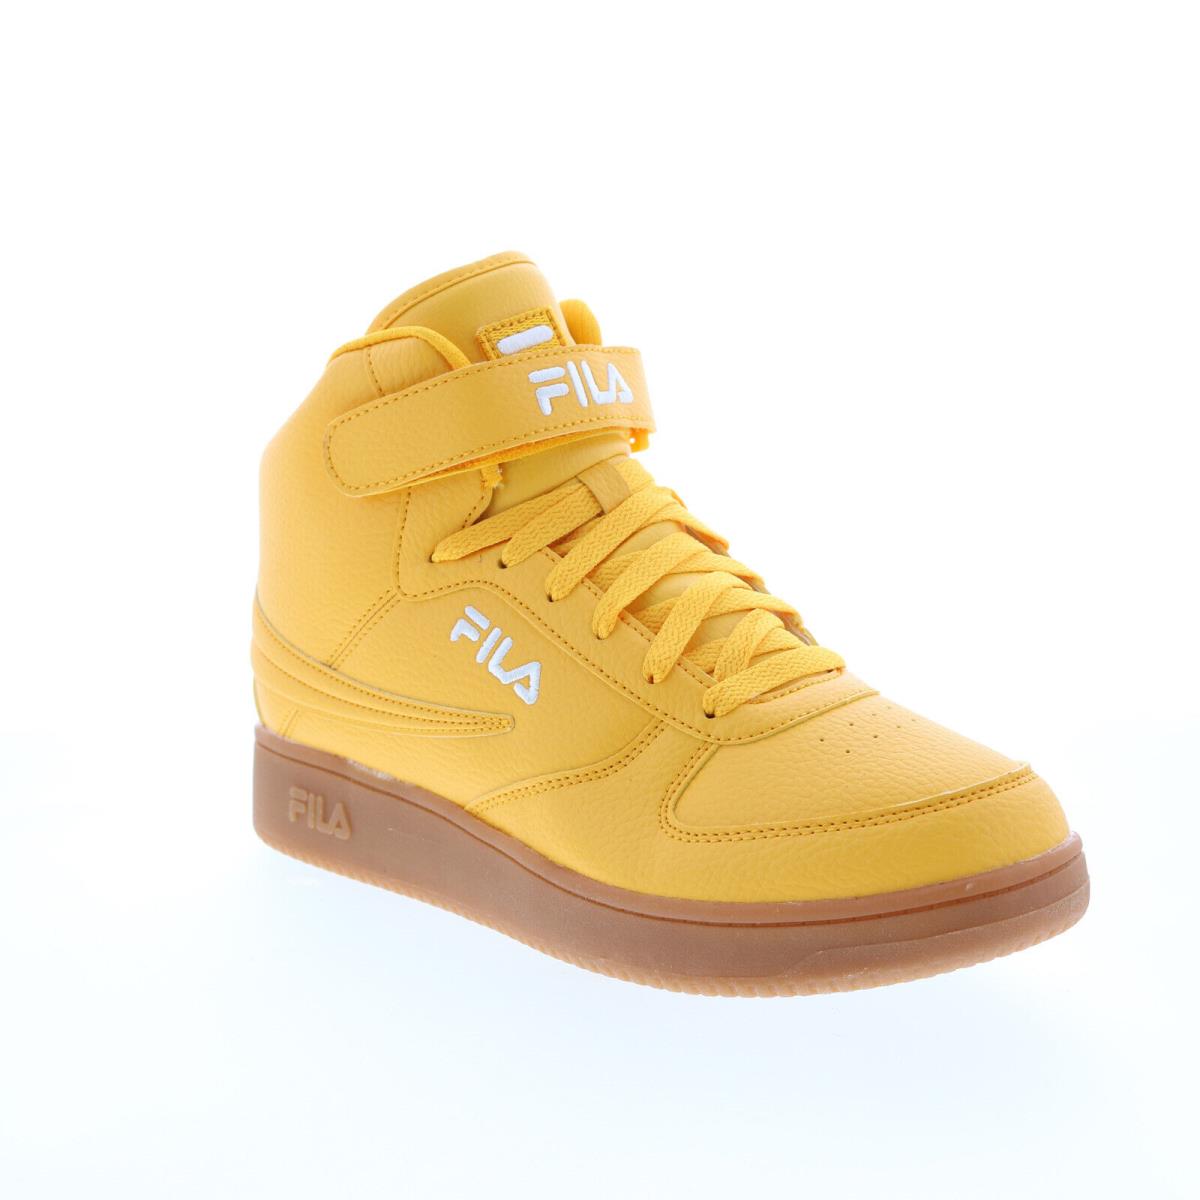 Fila A-high Gum 1BM01765-765 Mens Yellow Synthetic Lifestyle Sneakers Shoes